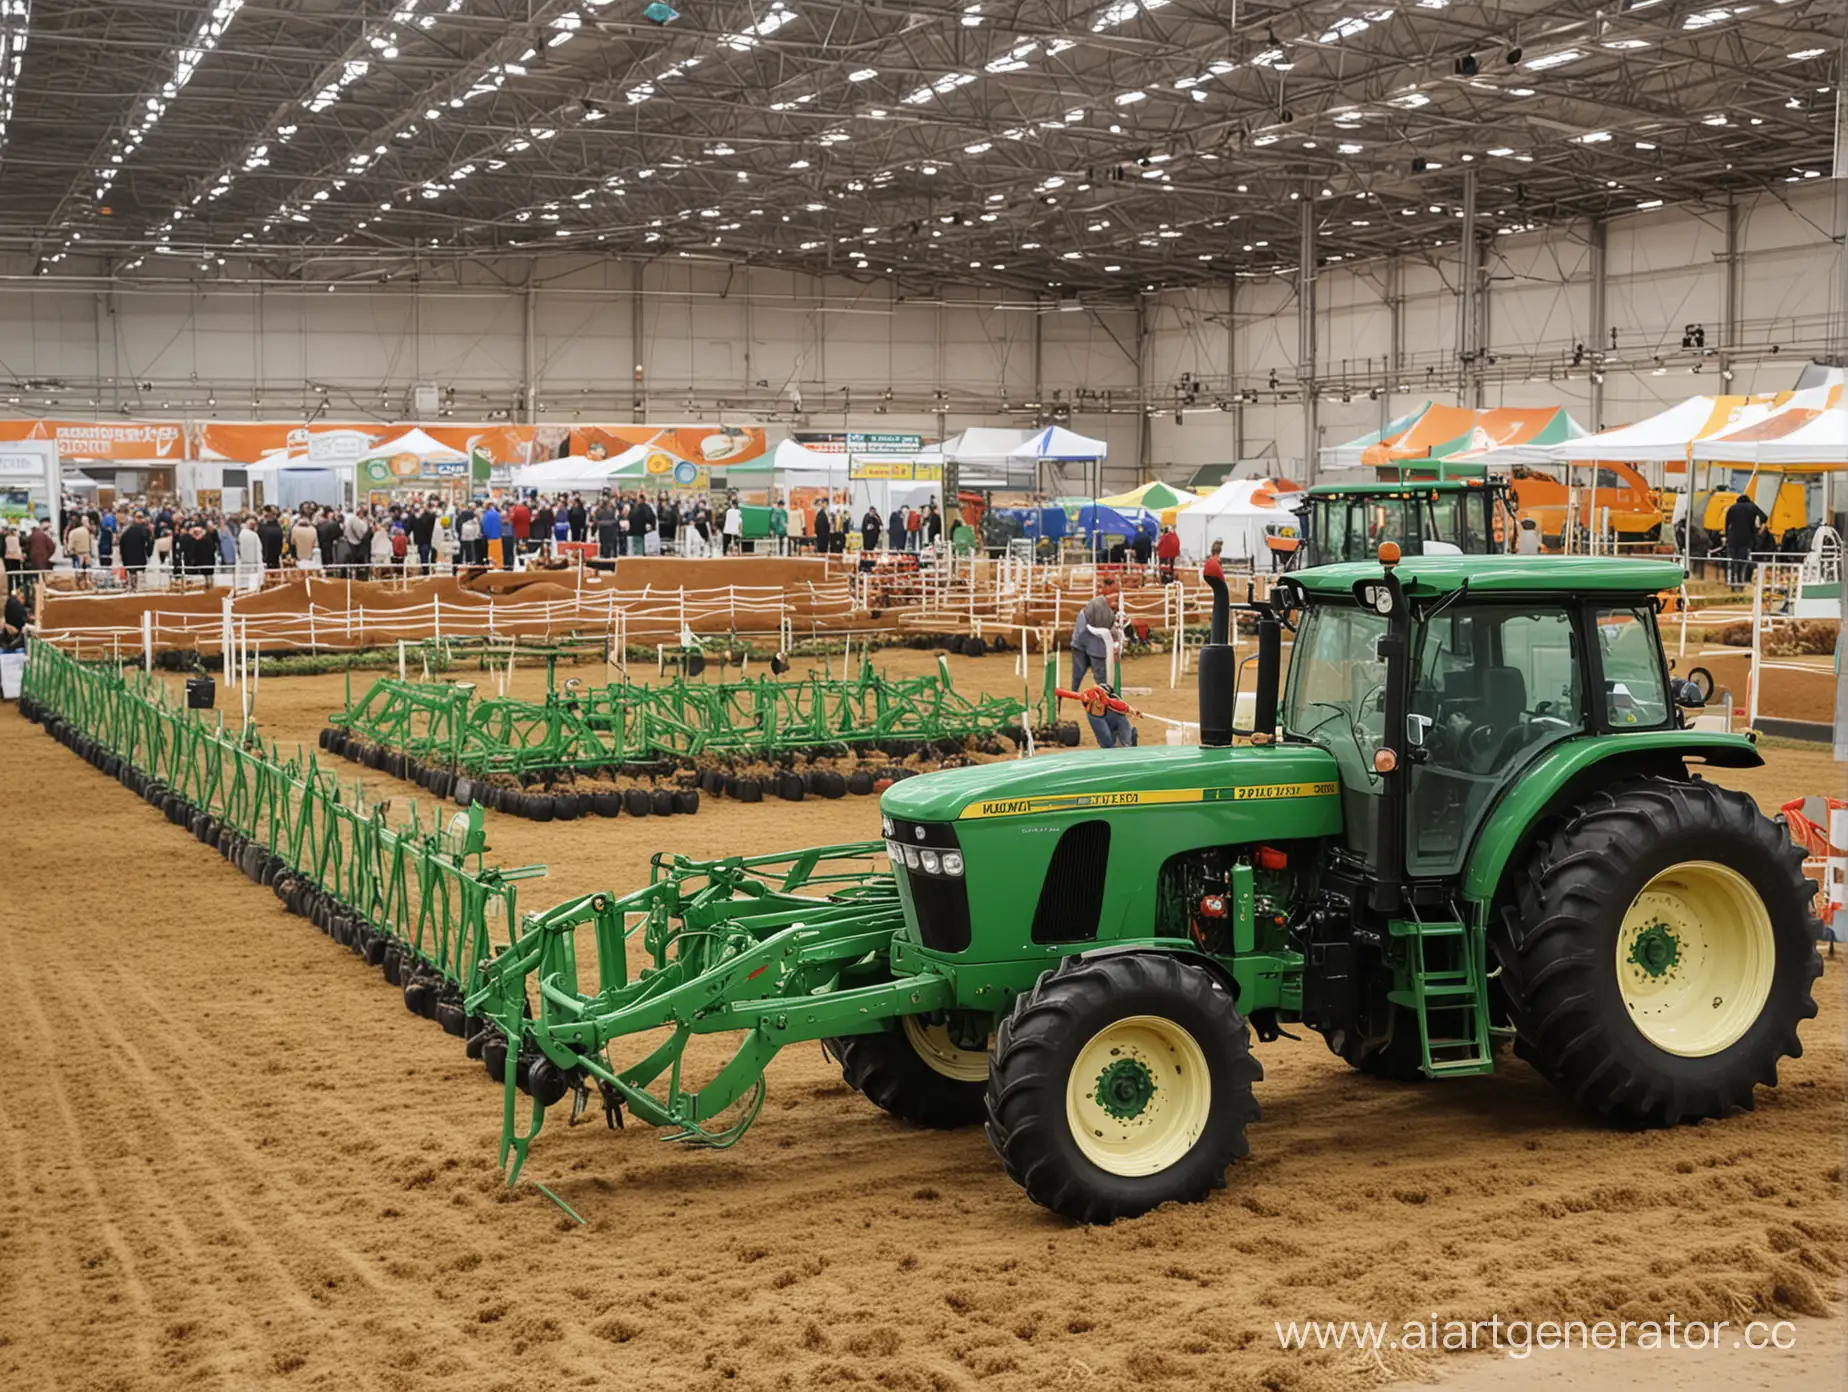 Vibrant-Agricultural-Exhibition-Farmers-Showcasing-Bountiful-Harvests-and-Livestock